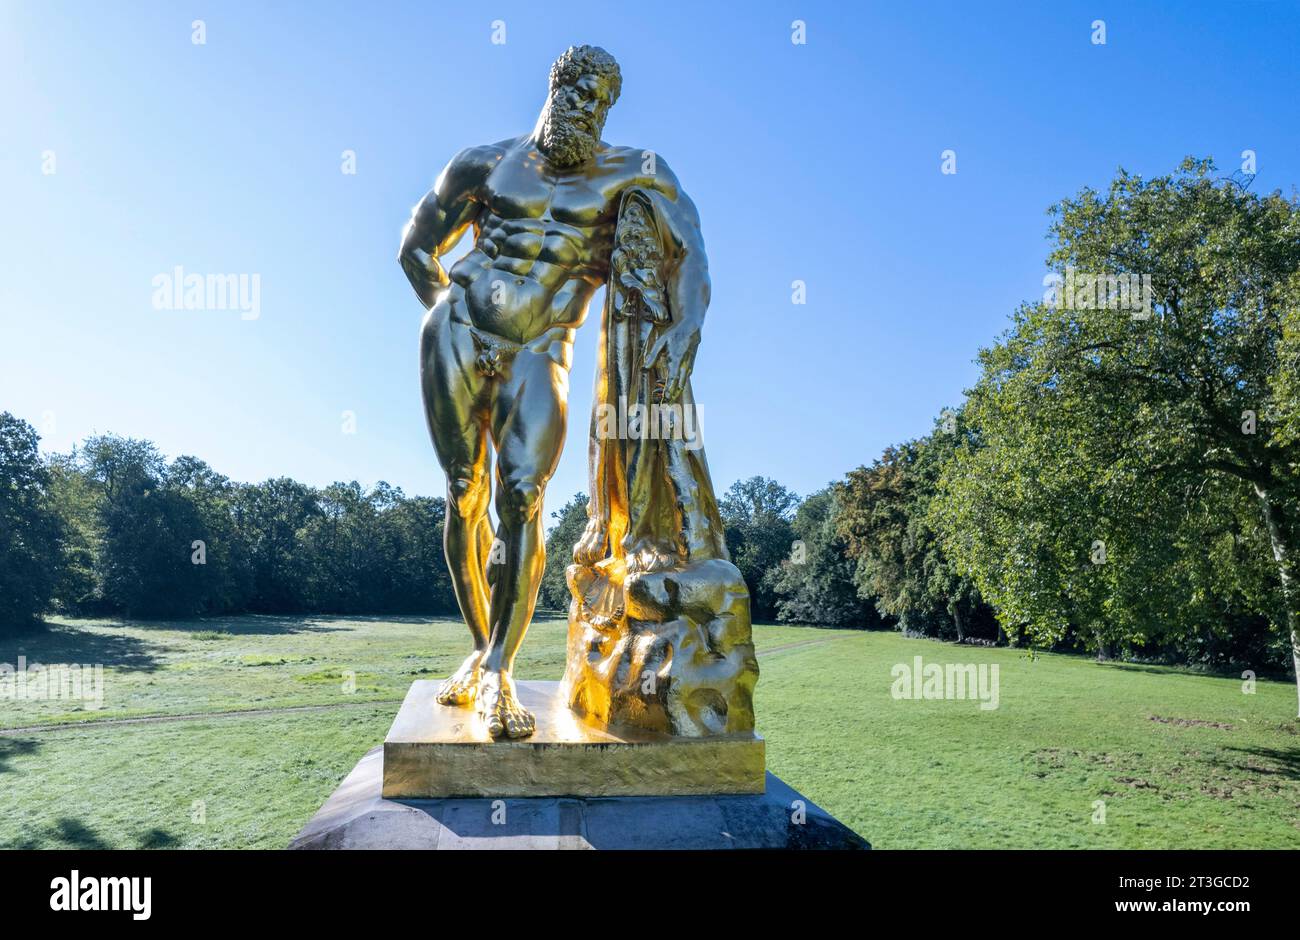 France, Seine et Marne, Maincy, Vaux le Vicomte castle, sculpture of Hercule Farnese in the castle park, formal gardens designed by Andre Le Notre and southern facde of the castle in the background Stock Photo